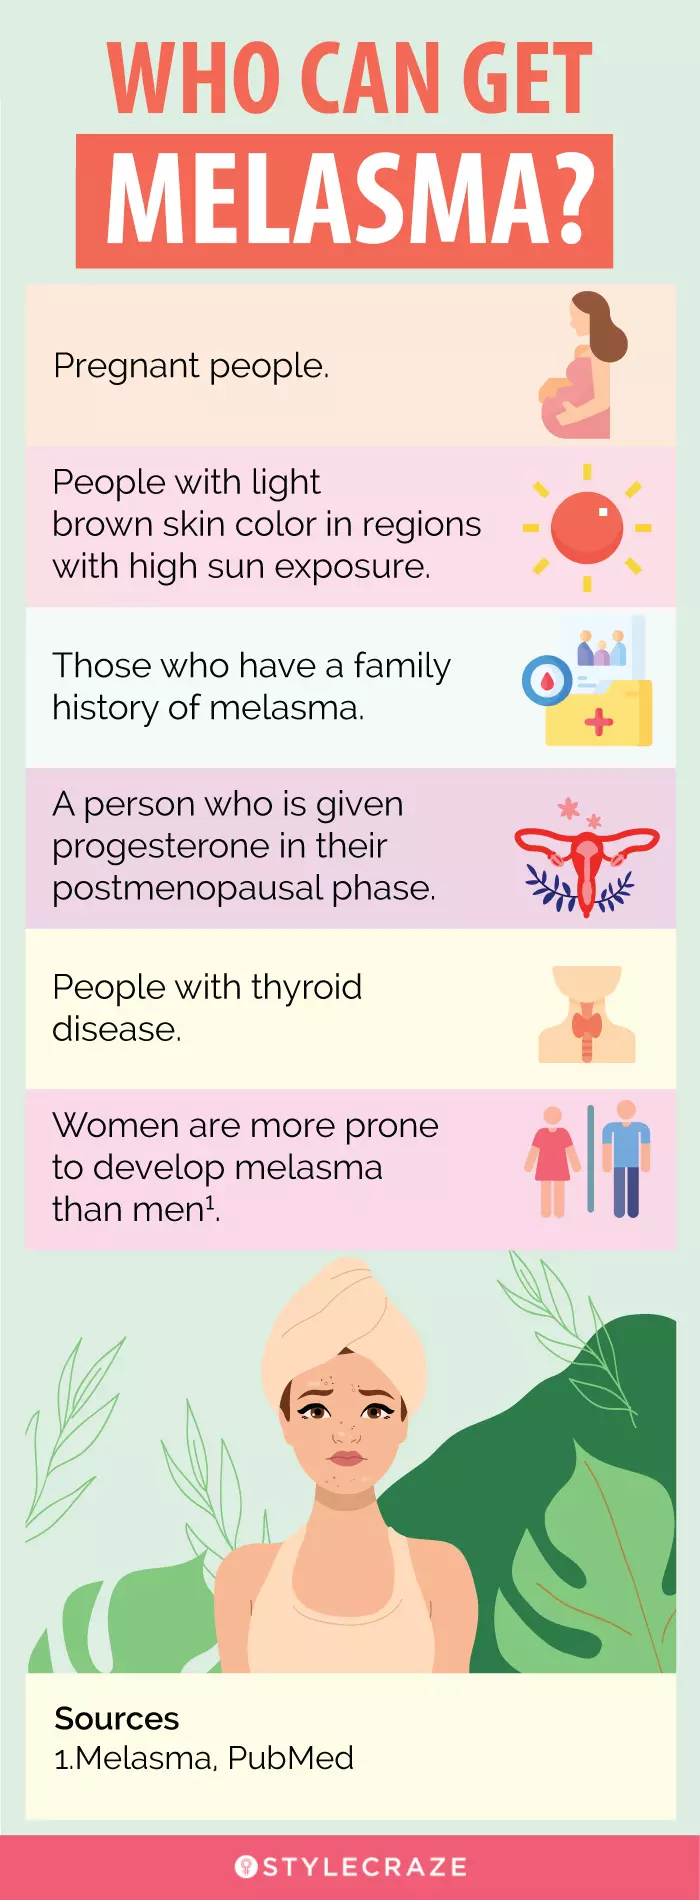 who can get melasma (infographic)